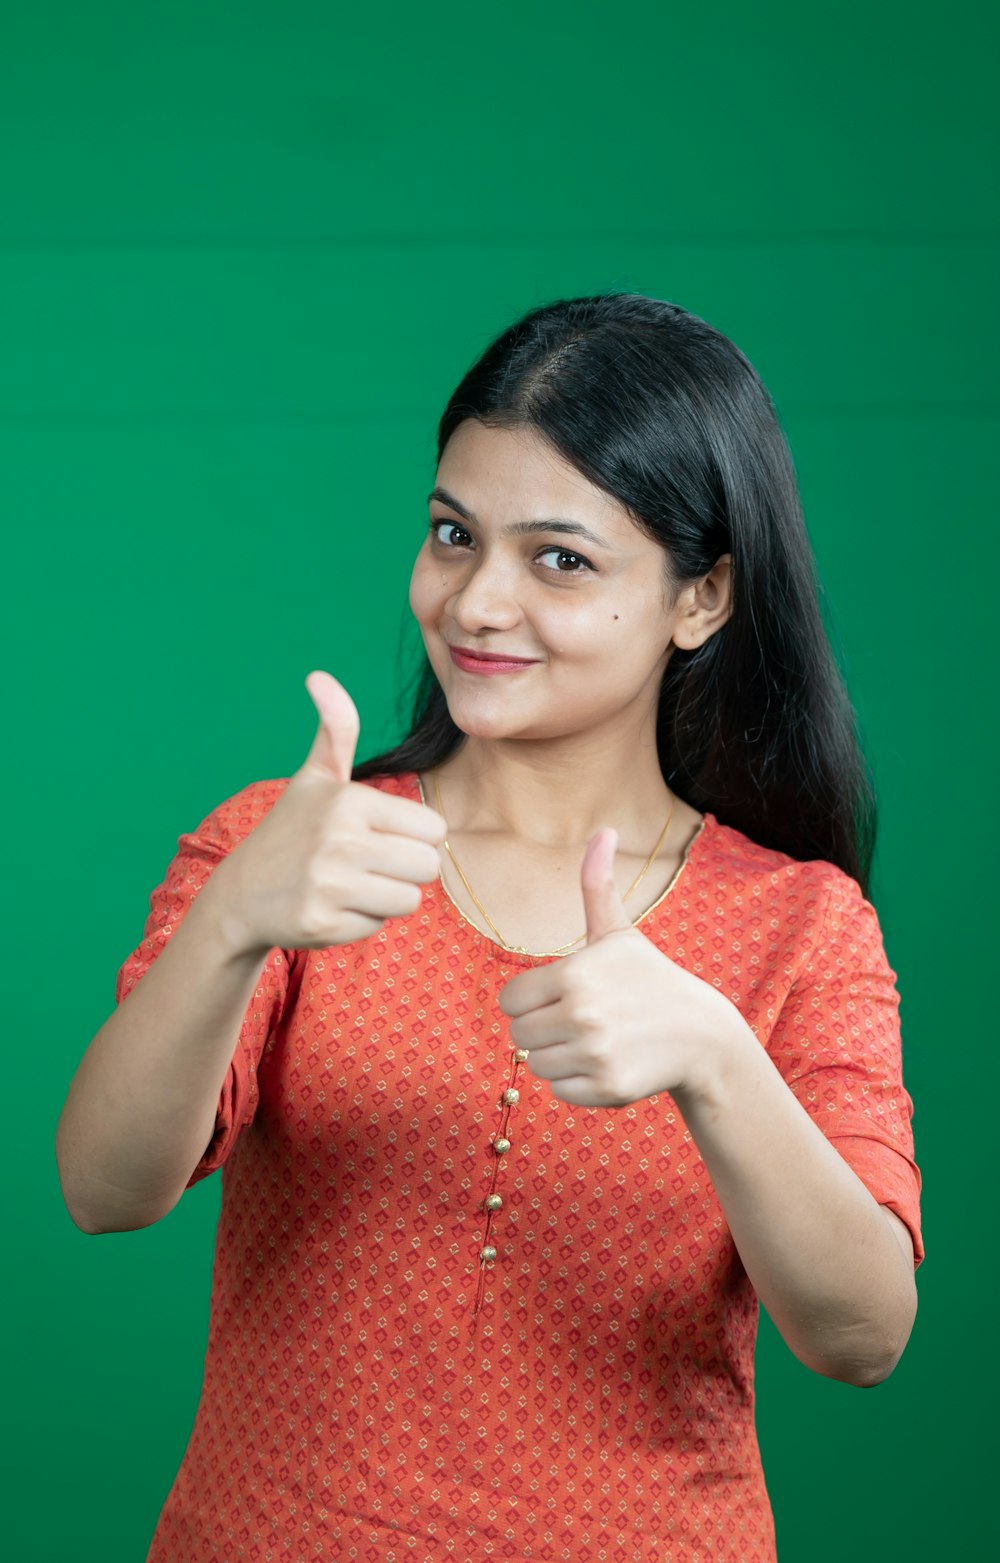 a woman giving a thumbs up sign